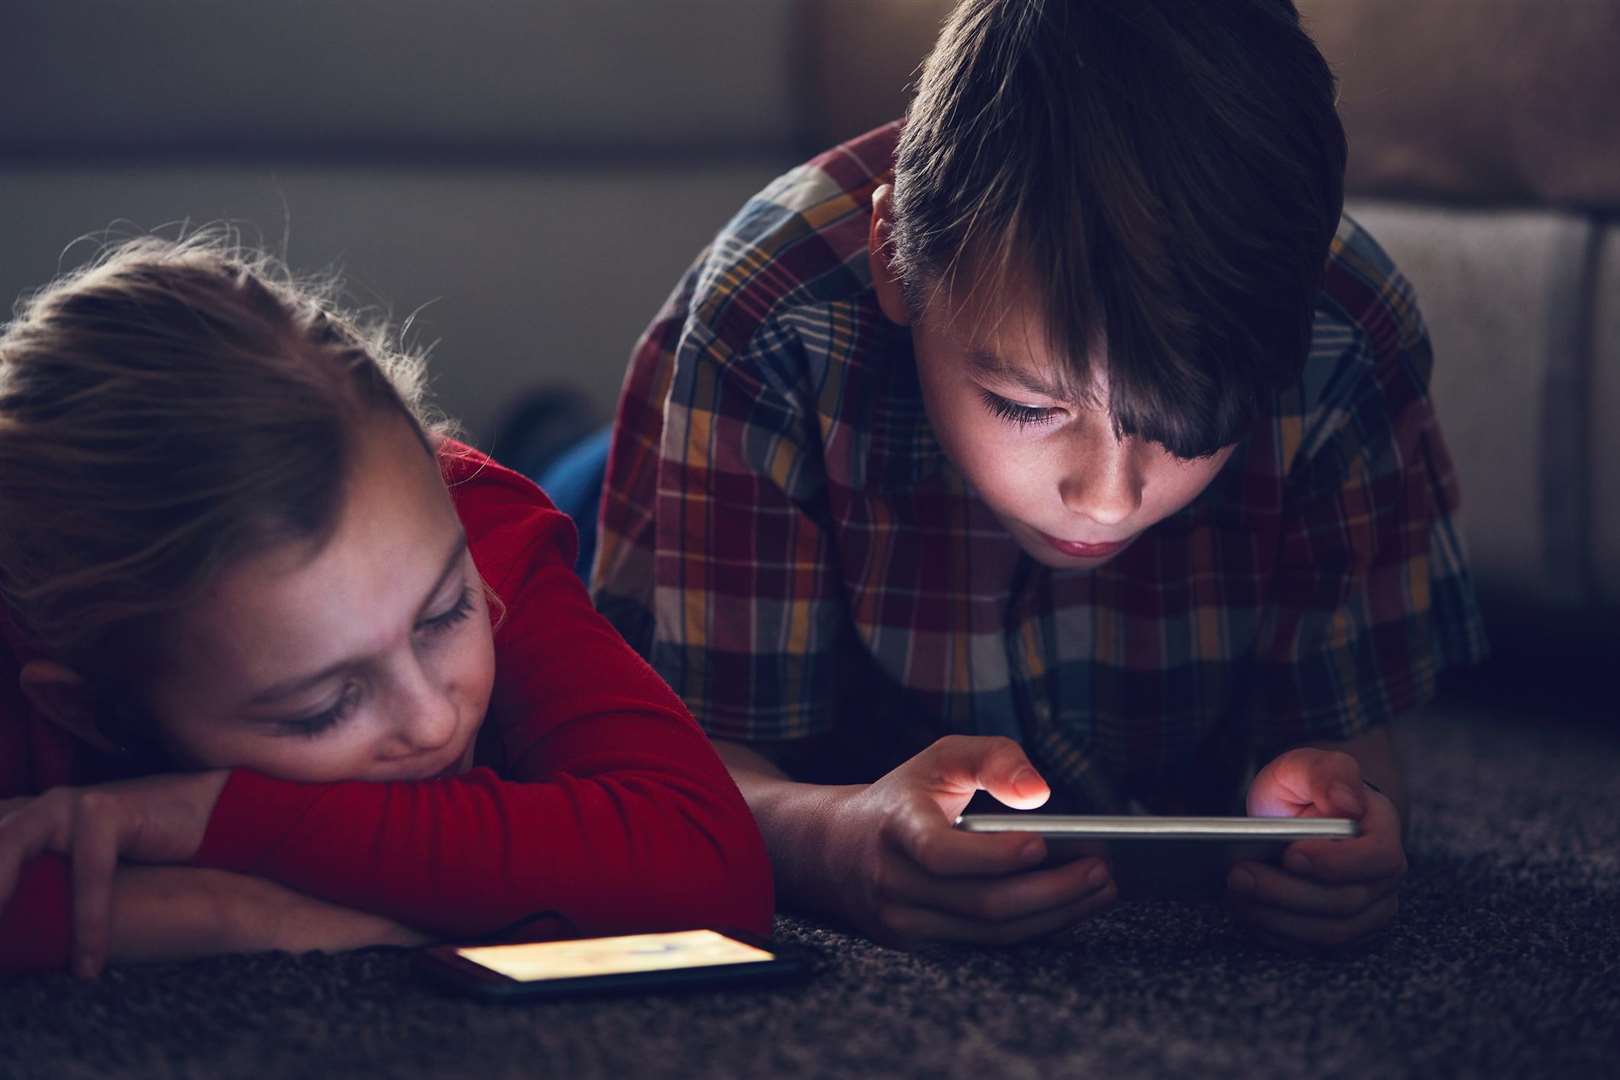 There are apps and advice to help parents ensure their children negotiate the online world safely